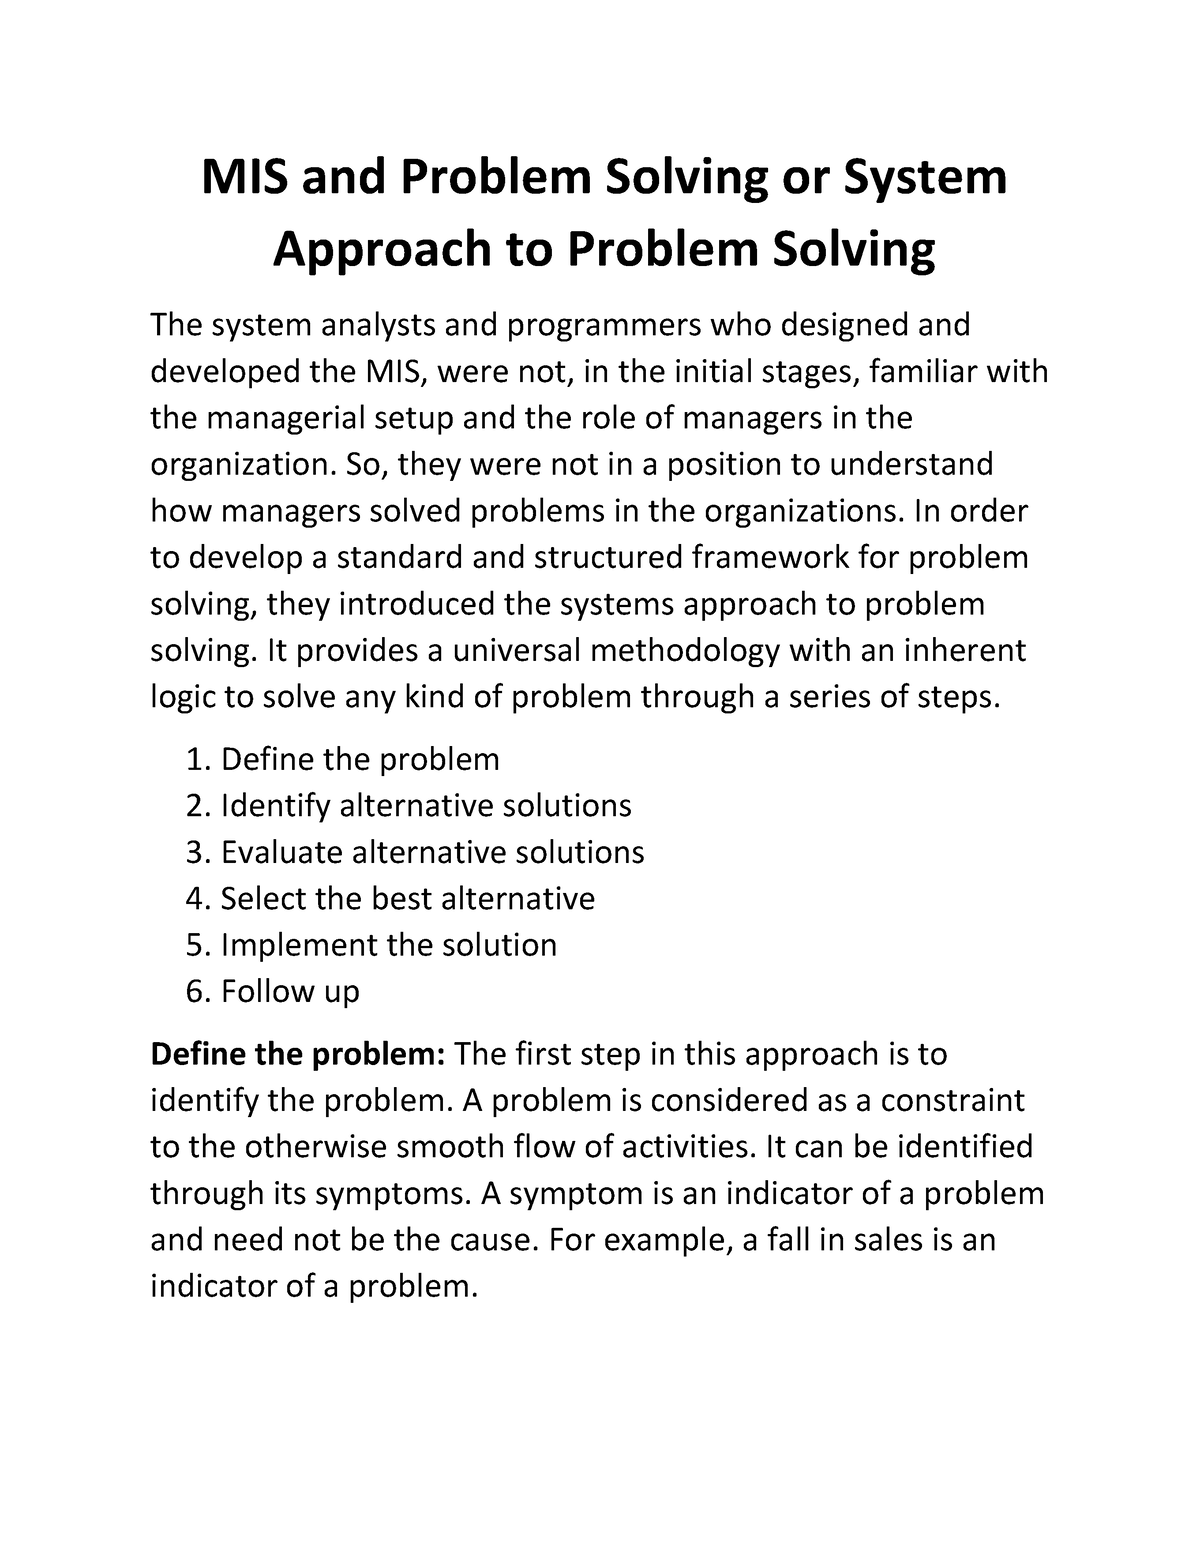 systems approach to problem solving in mis